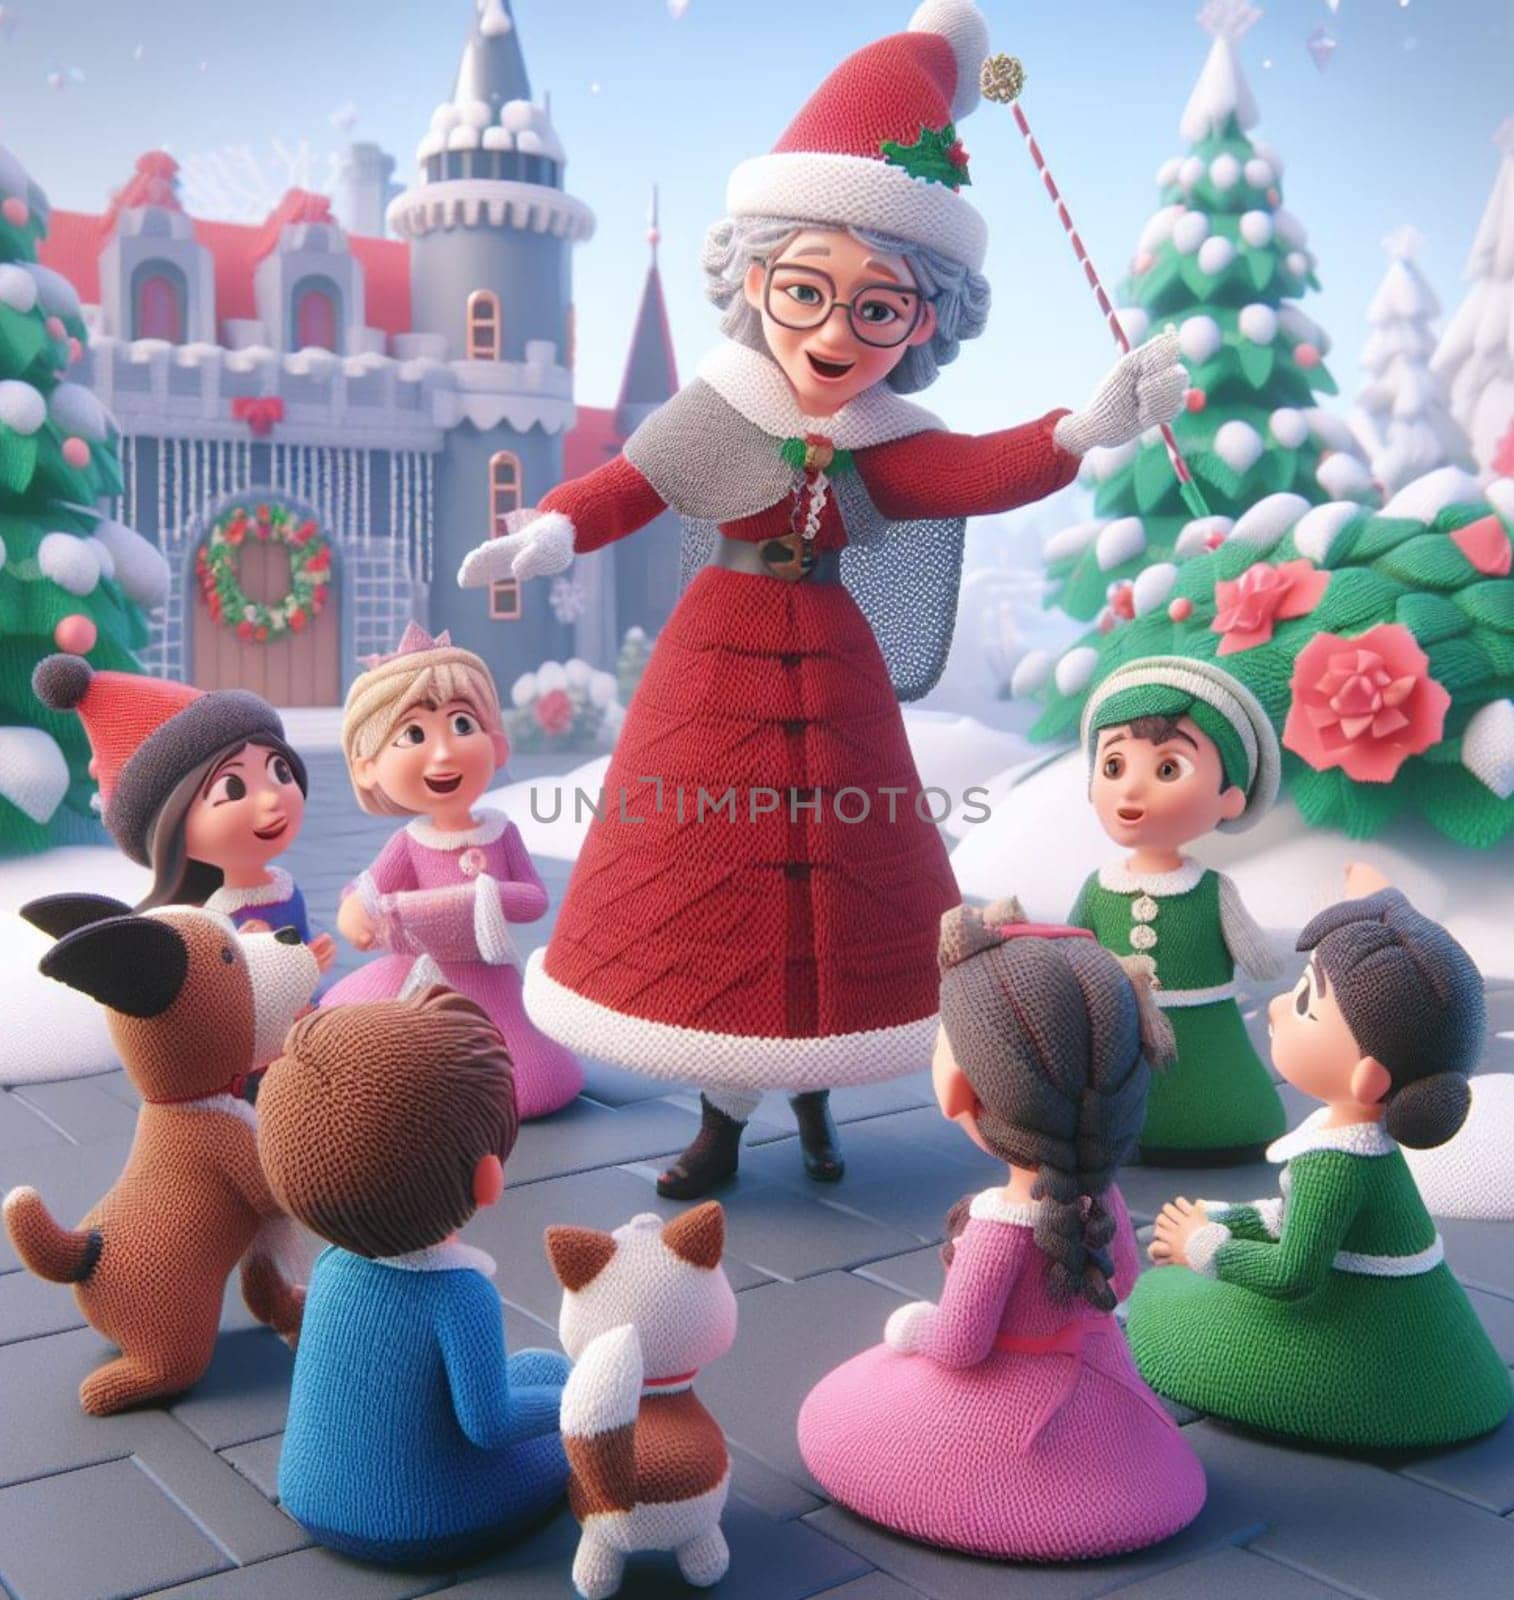 granny wear santa claus costume telling christmas fairy tales to children near a castle by verbano